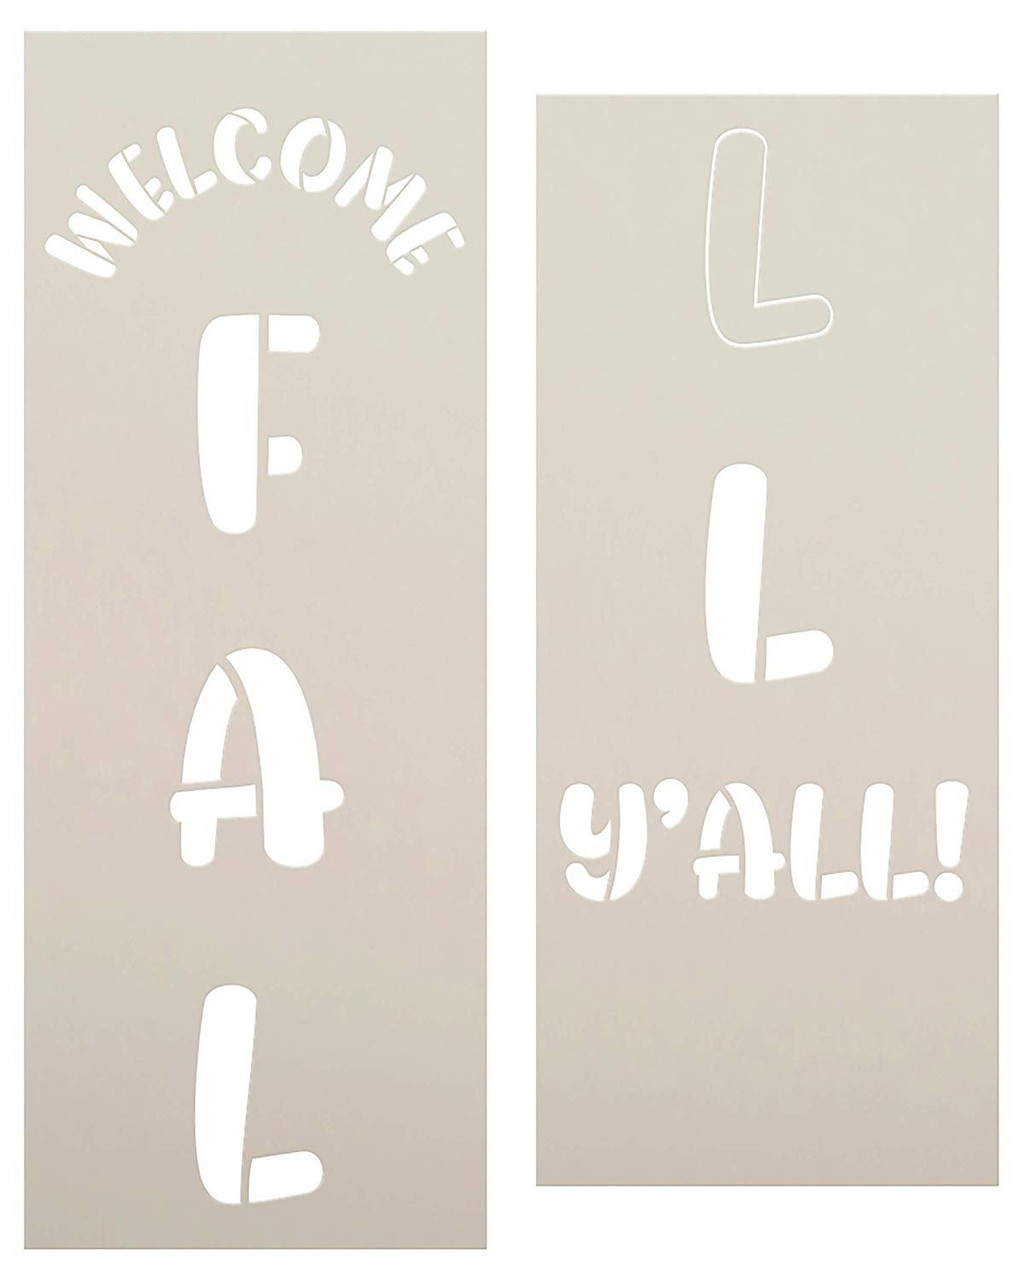 Welcome Fall Y'all Tall Porch Stencil Set by StudioR12 | 7 Piece | Apple Pumpkin Leaf | DIY Large Vertical Autumn Home Decor | Craft & Paint Wood Leaner Signs | Reusable Mylar Template | Size 4ft